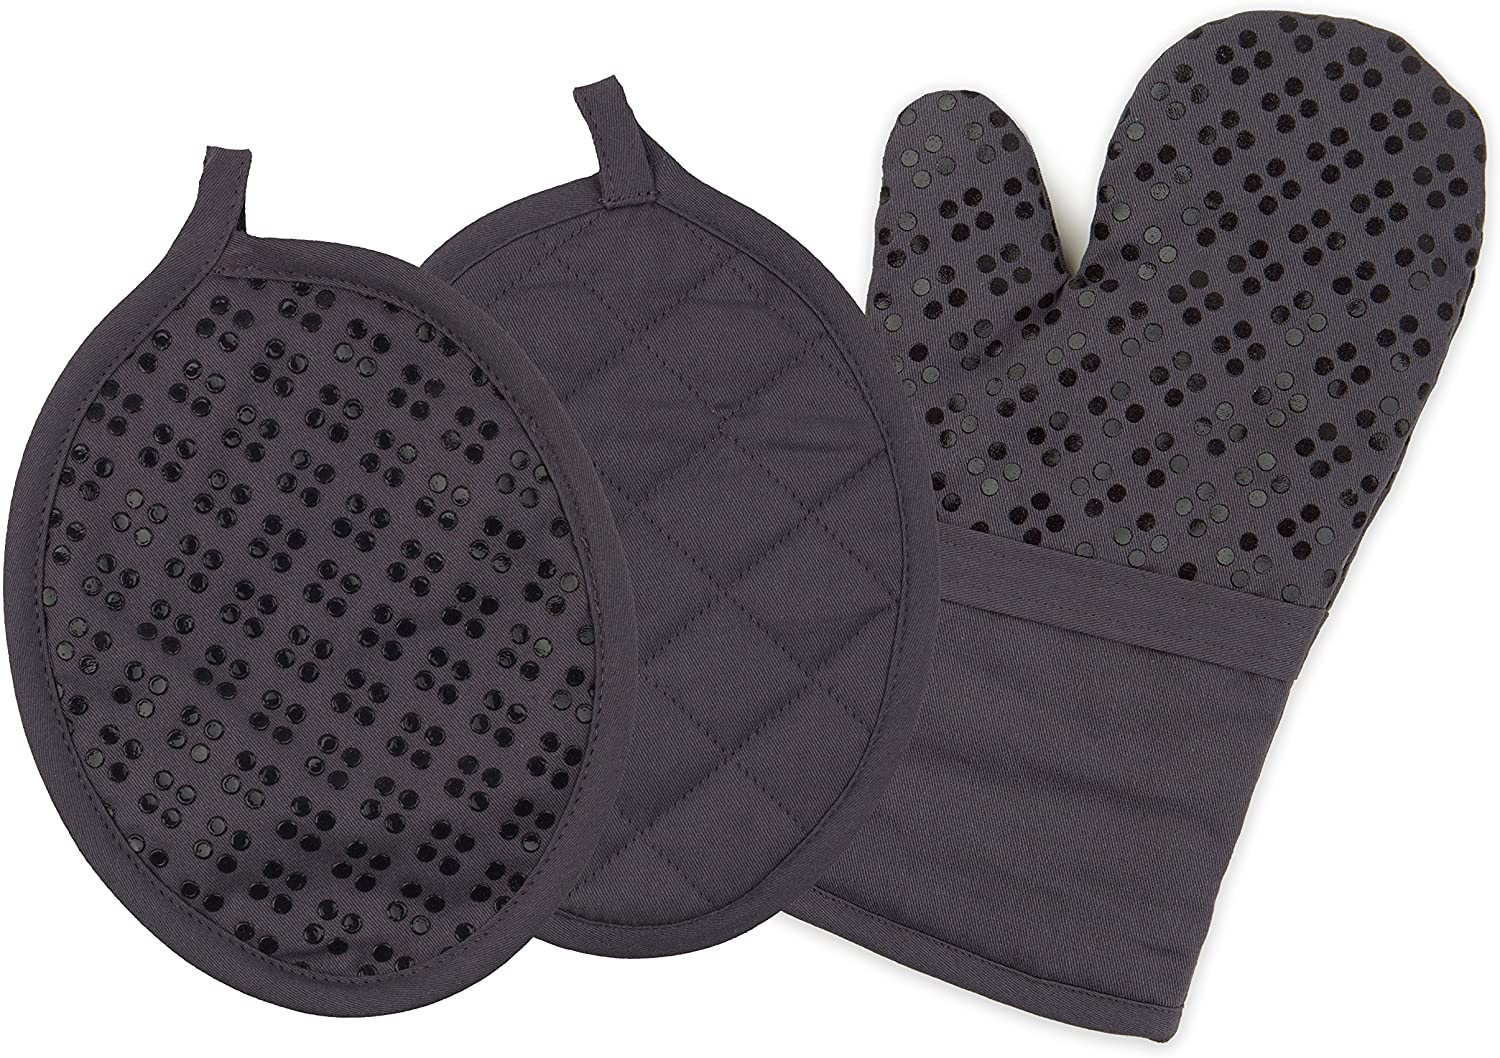 Oven Mitts Pot Holders Sets  Silicone Pot Holders Oven Mitts